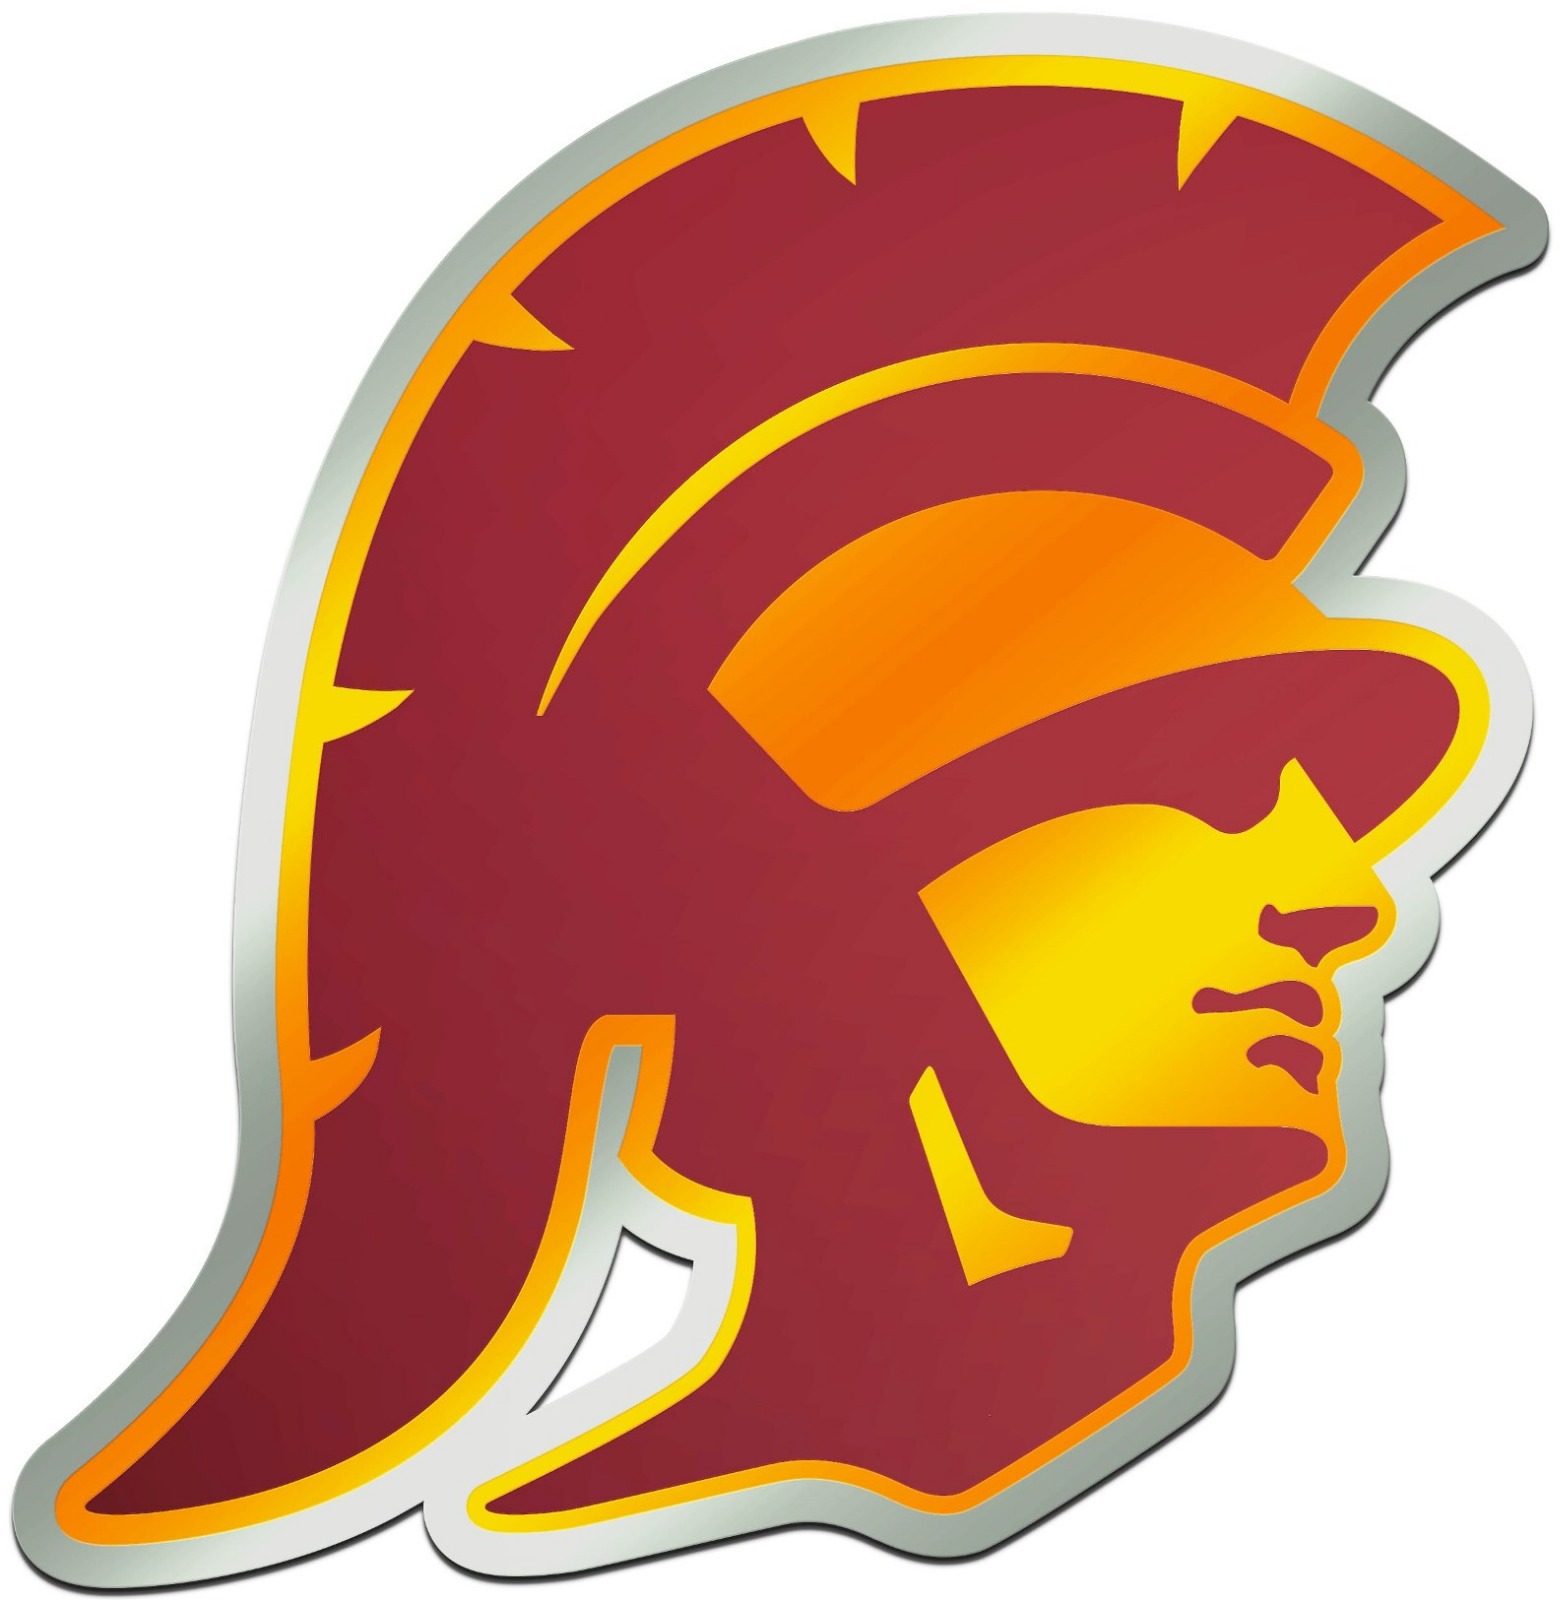 Usc Trojans Sd Deluxe Color Acrylic Auto Emblem Raised Decal Southern California 614934191620 Ebay 